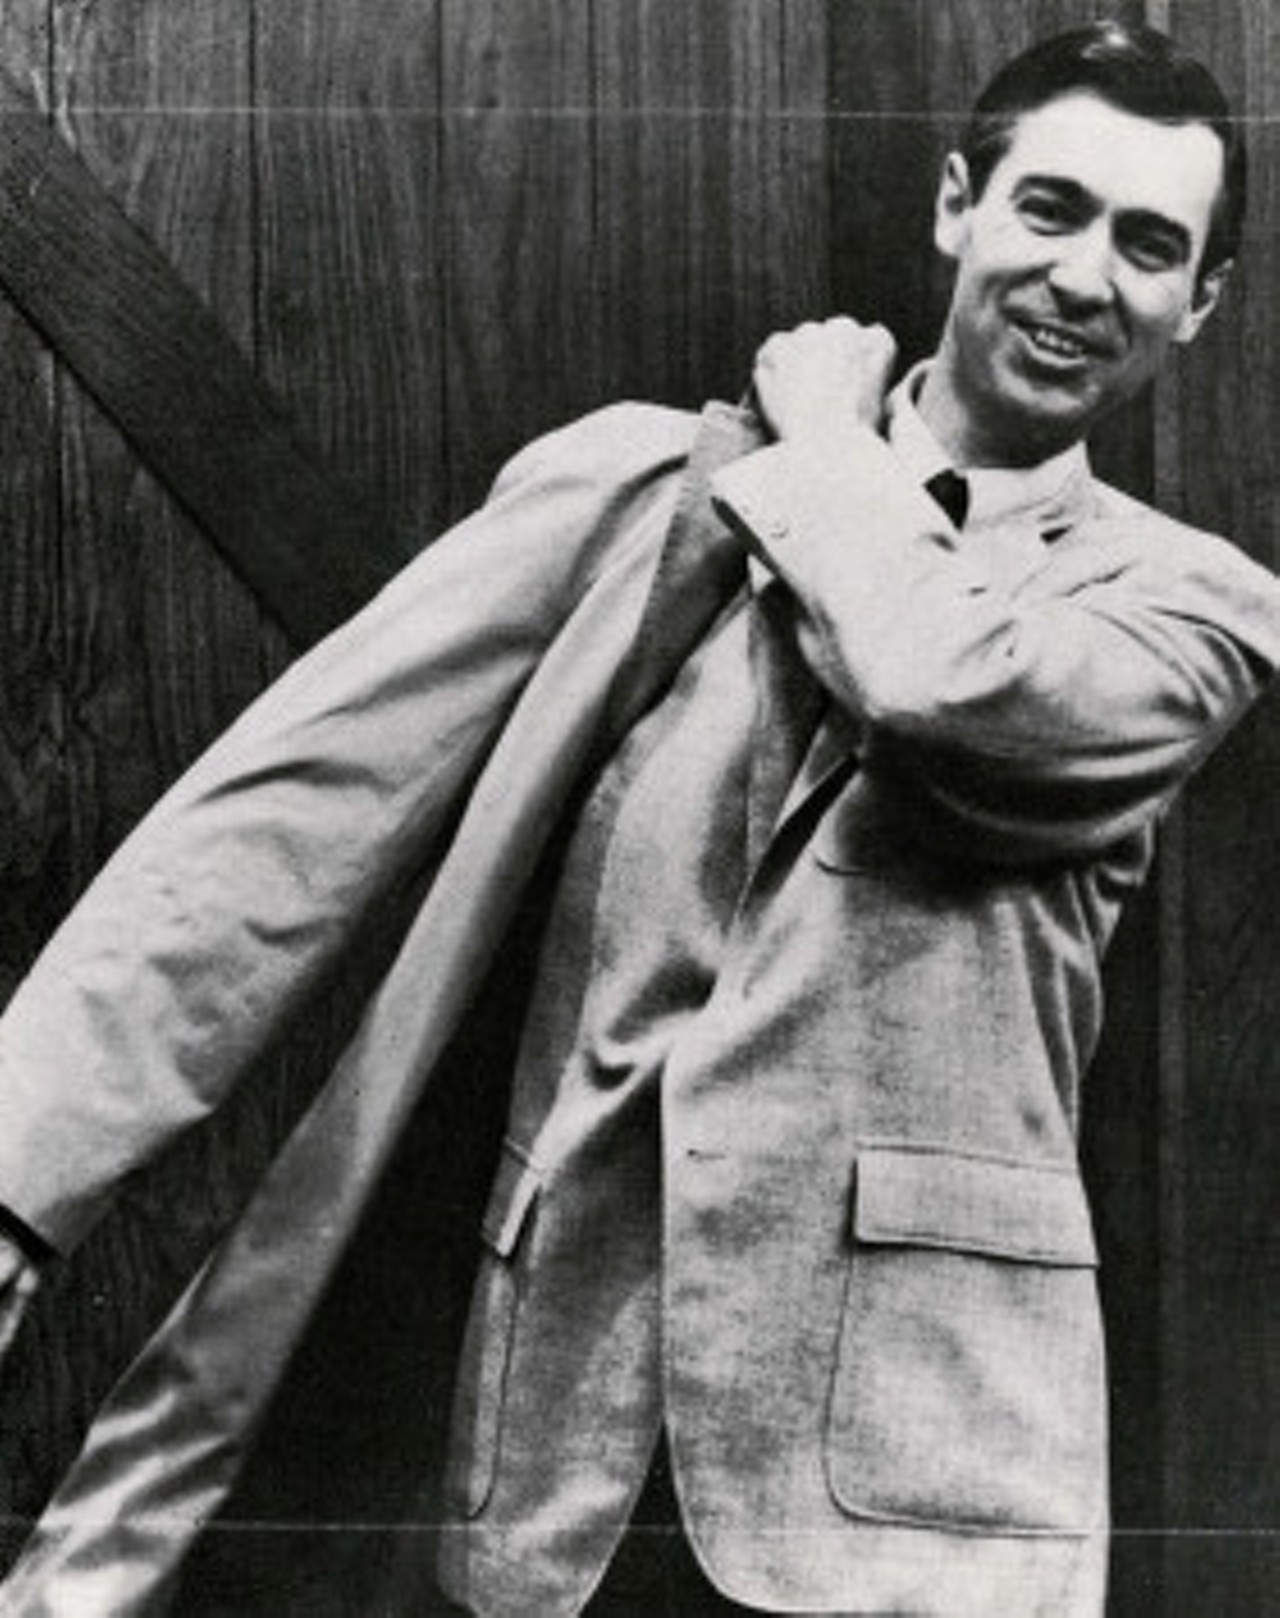 Fred Rogers (a.k.a. Mr. Rogers)- The creator and host of the popular children's show Mr. Rogers' Neighborhood.